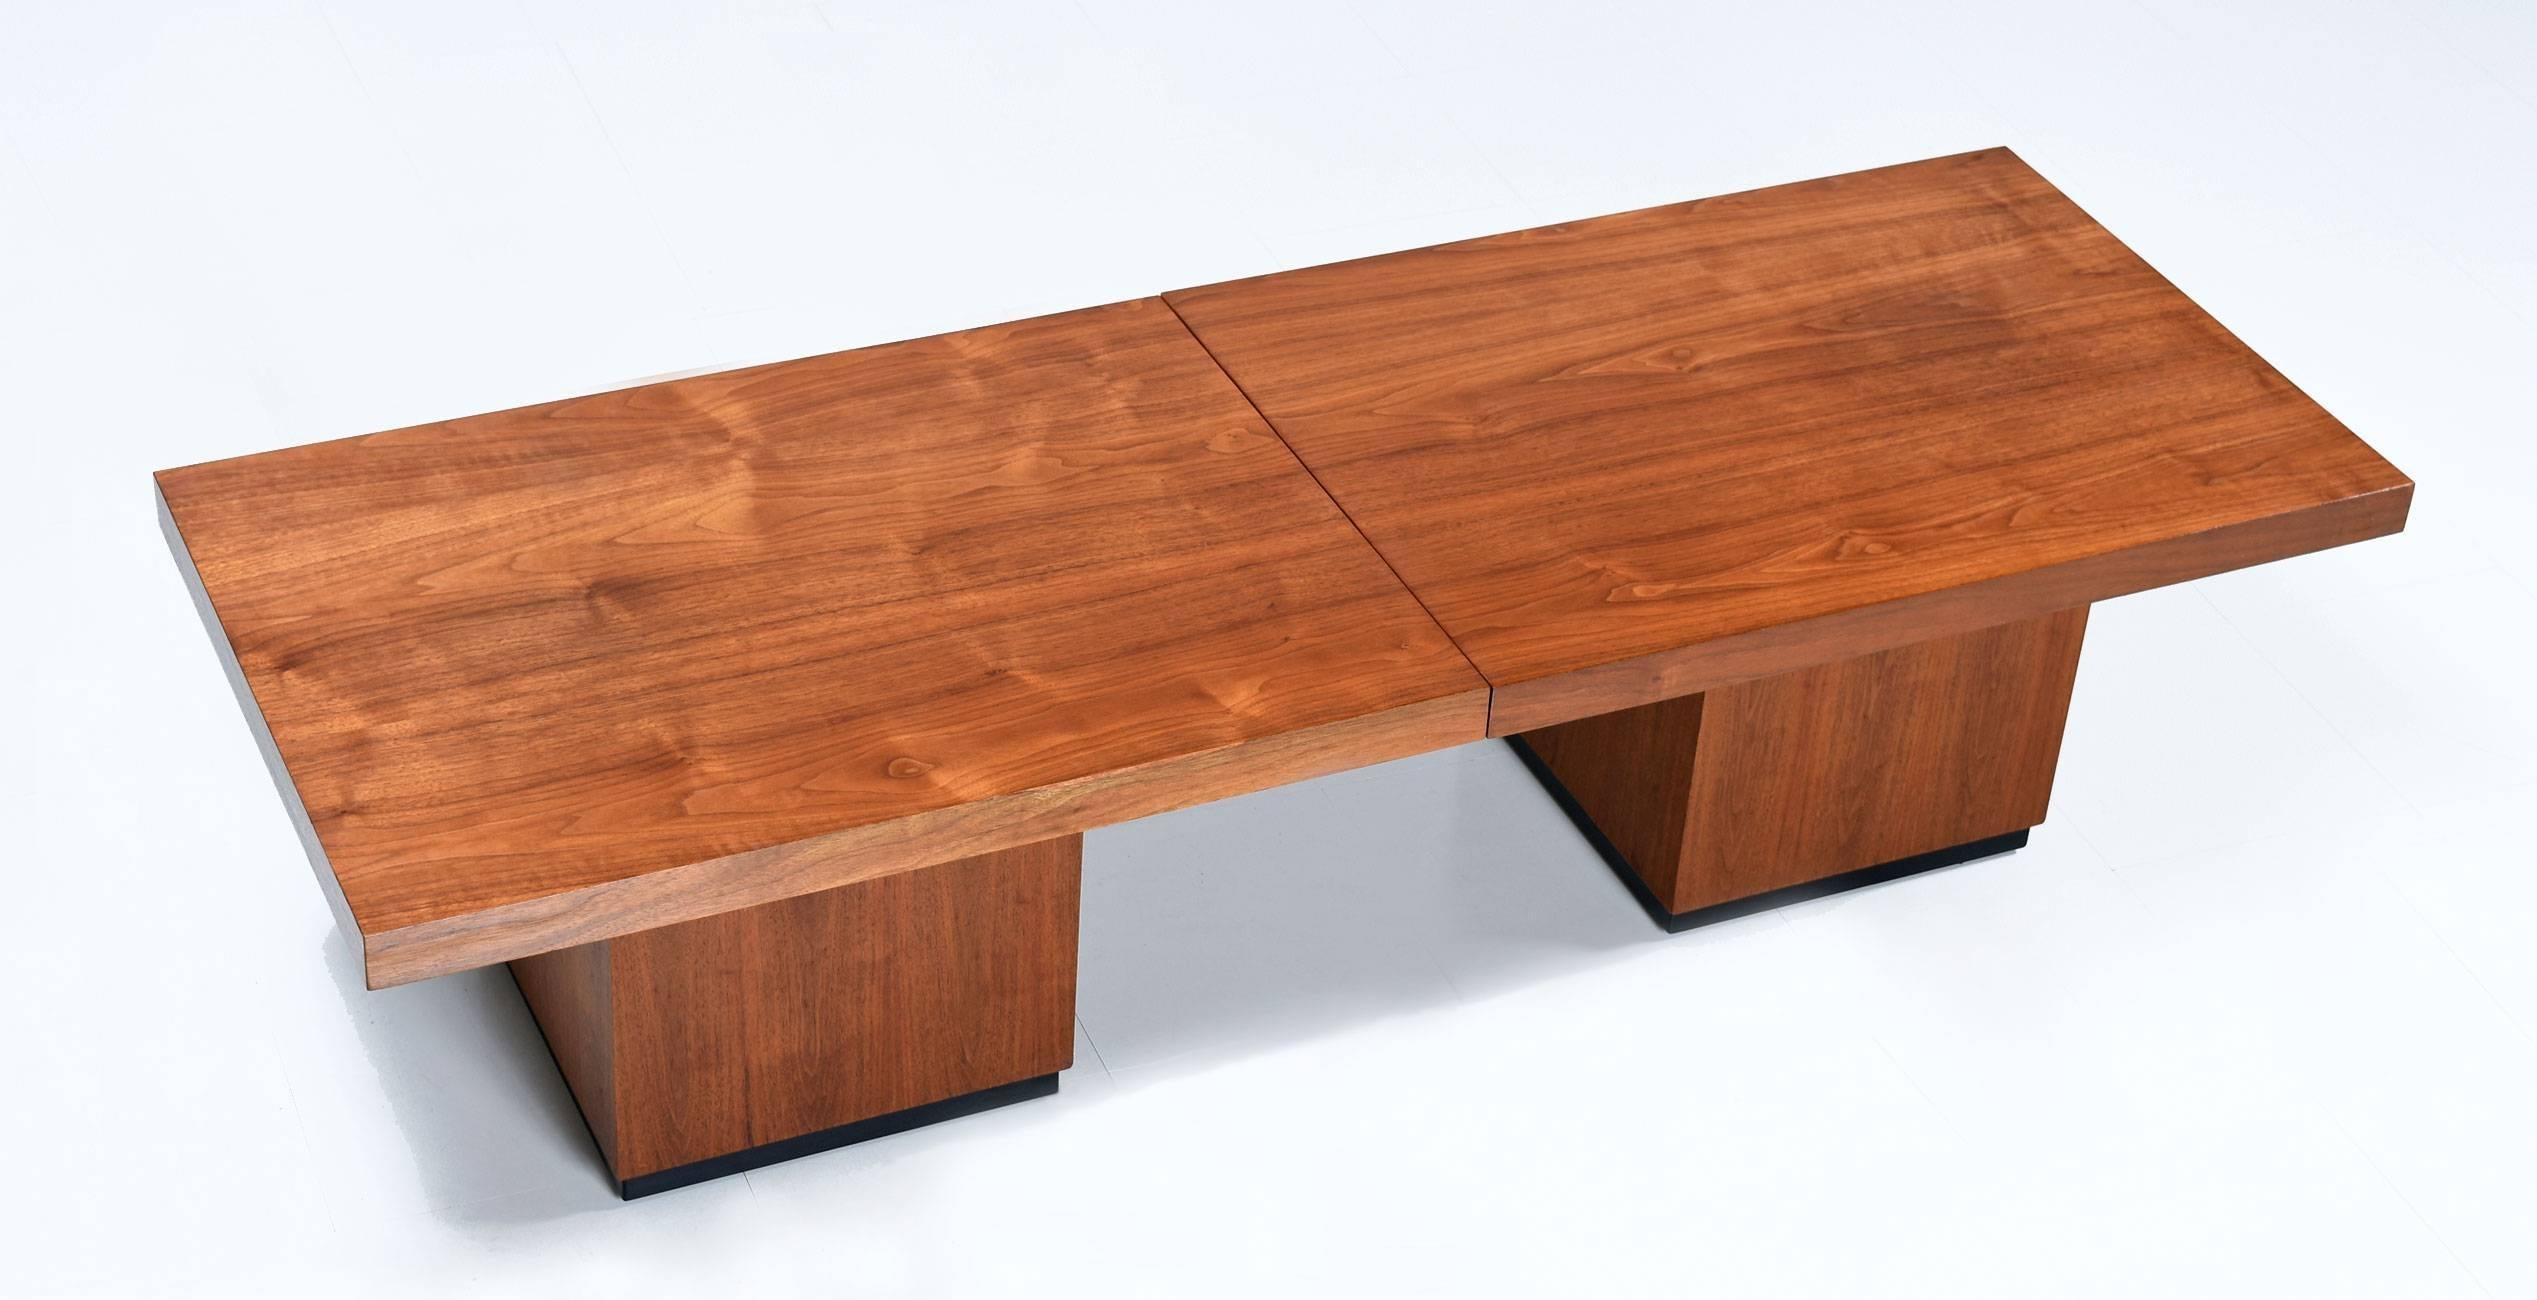 American made, designed by John Keal for Brown Saltman. Handsome, sculptural, masculine expanding walnut wood coffee table. Black laminate tabletop is revealed at centre upon expansion. This table is ideal for those who love to entertain. Use this